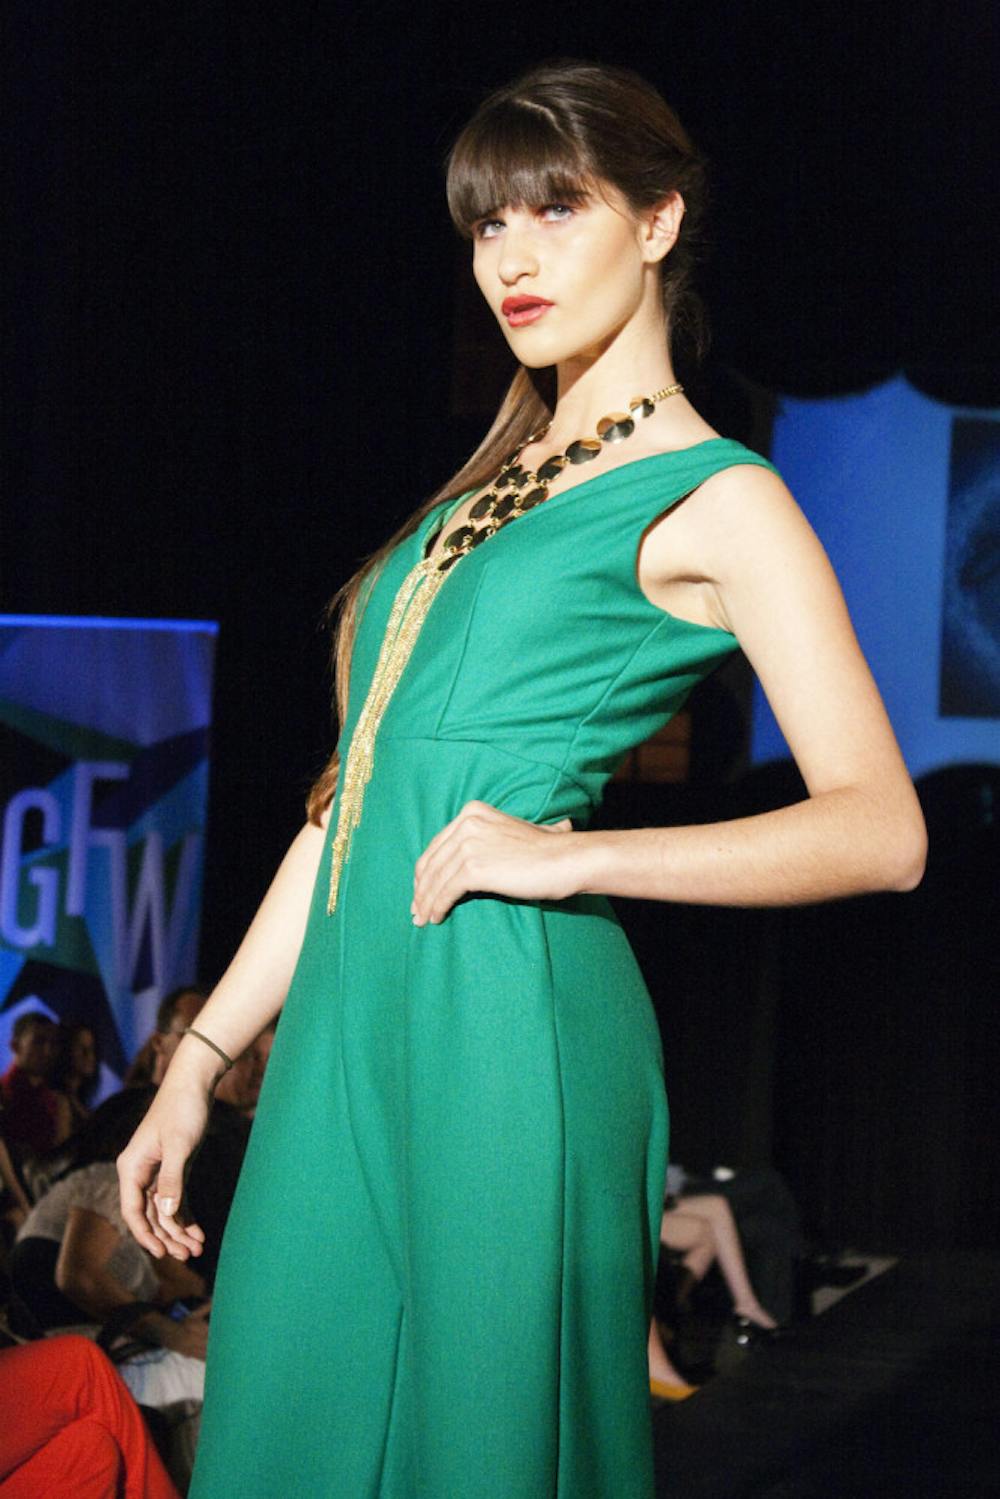 <p>A model strikes a pose during the runway shows on Saturday night as part of Gainesville Fashion Week.</p>